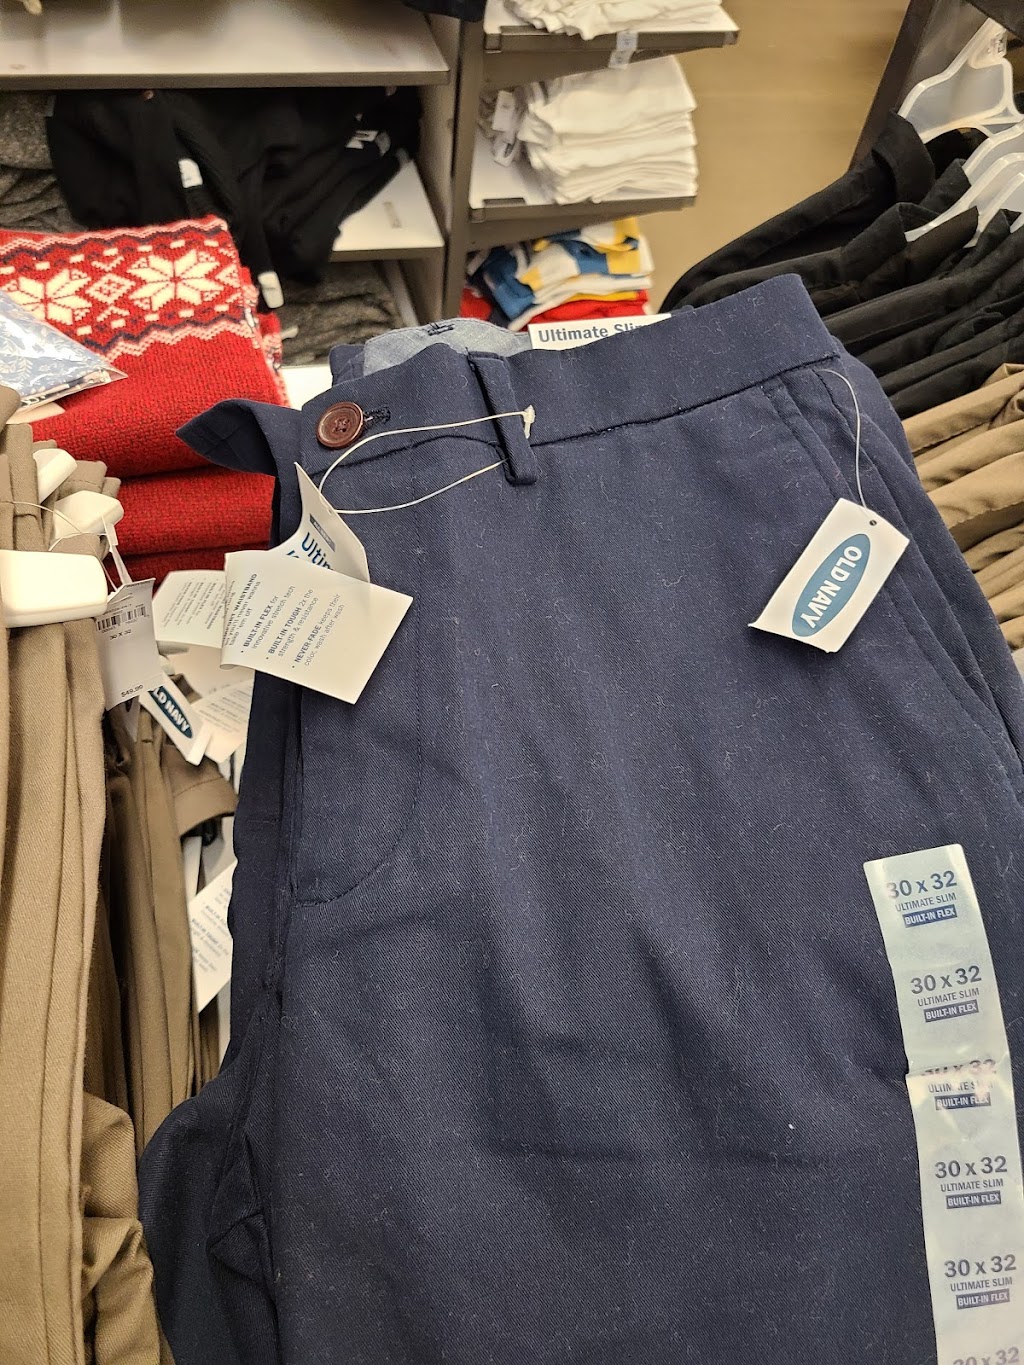 Old Navy Outlet | 1947 Old Country Rd, Riverhead, NY 11901 | Phone: (631) 369-5719